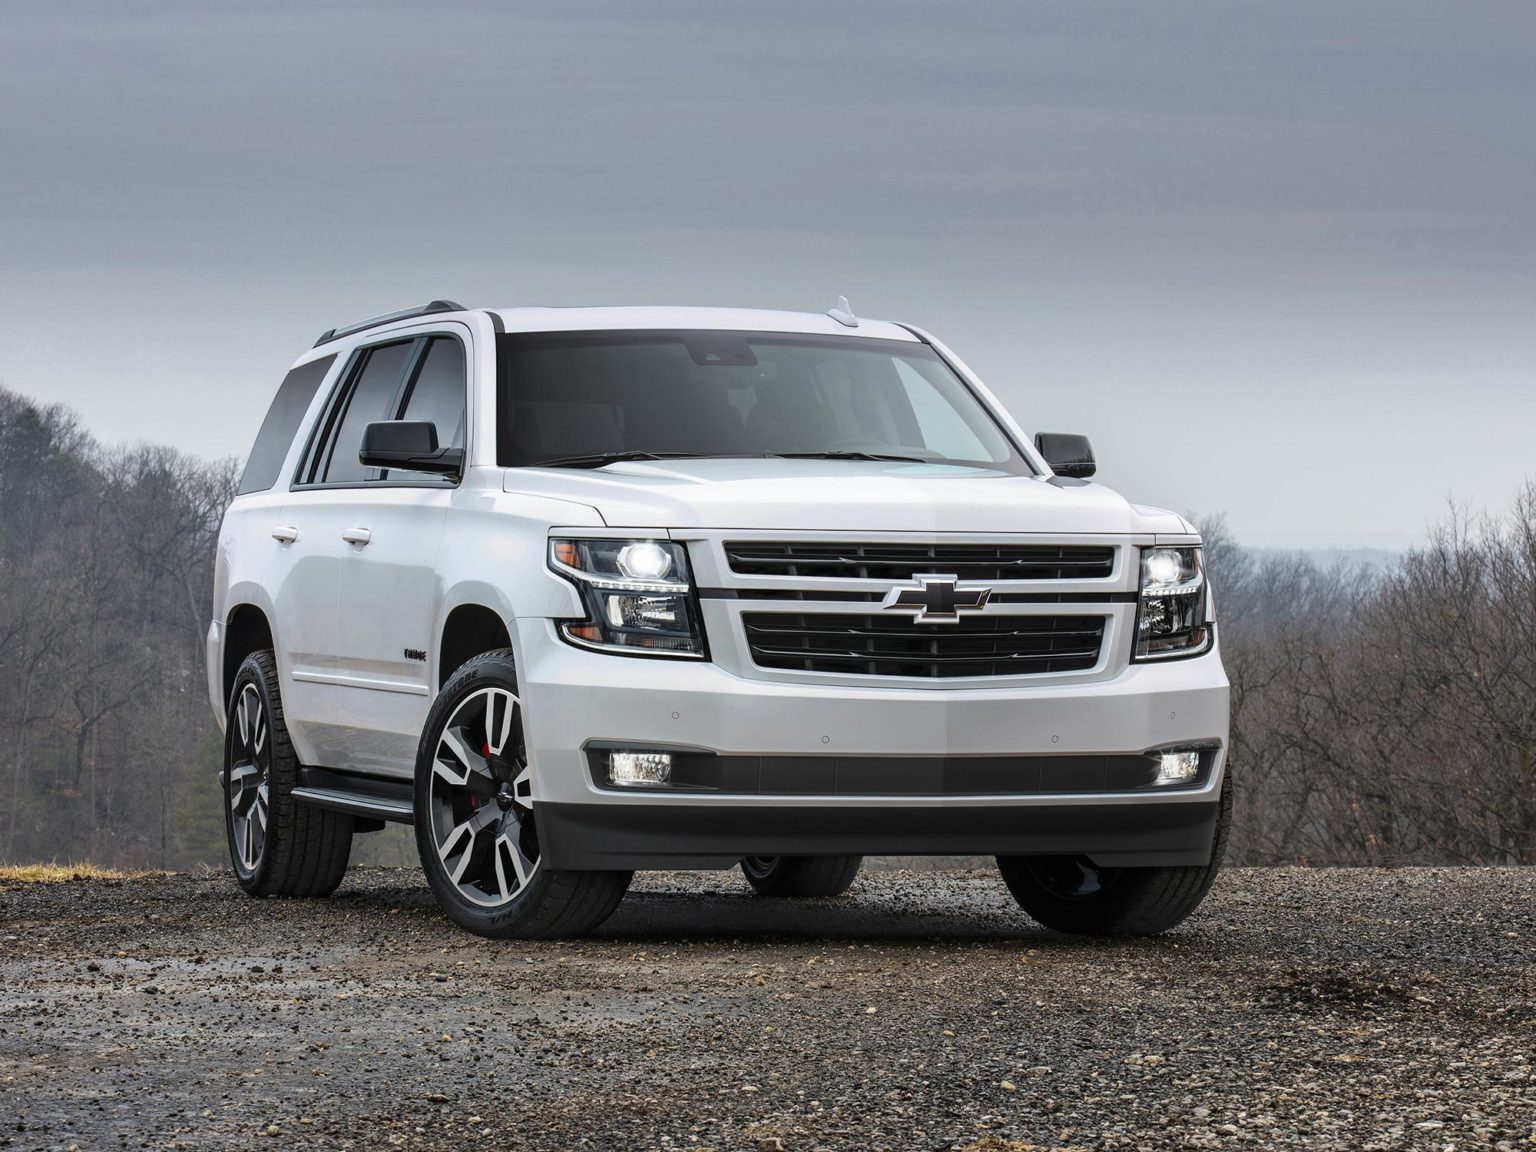 The Chevrolet Tahoe was highly rated on J.D. Power's list of most dependable vehicles.